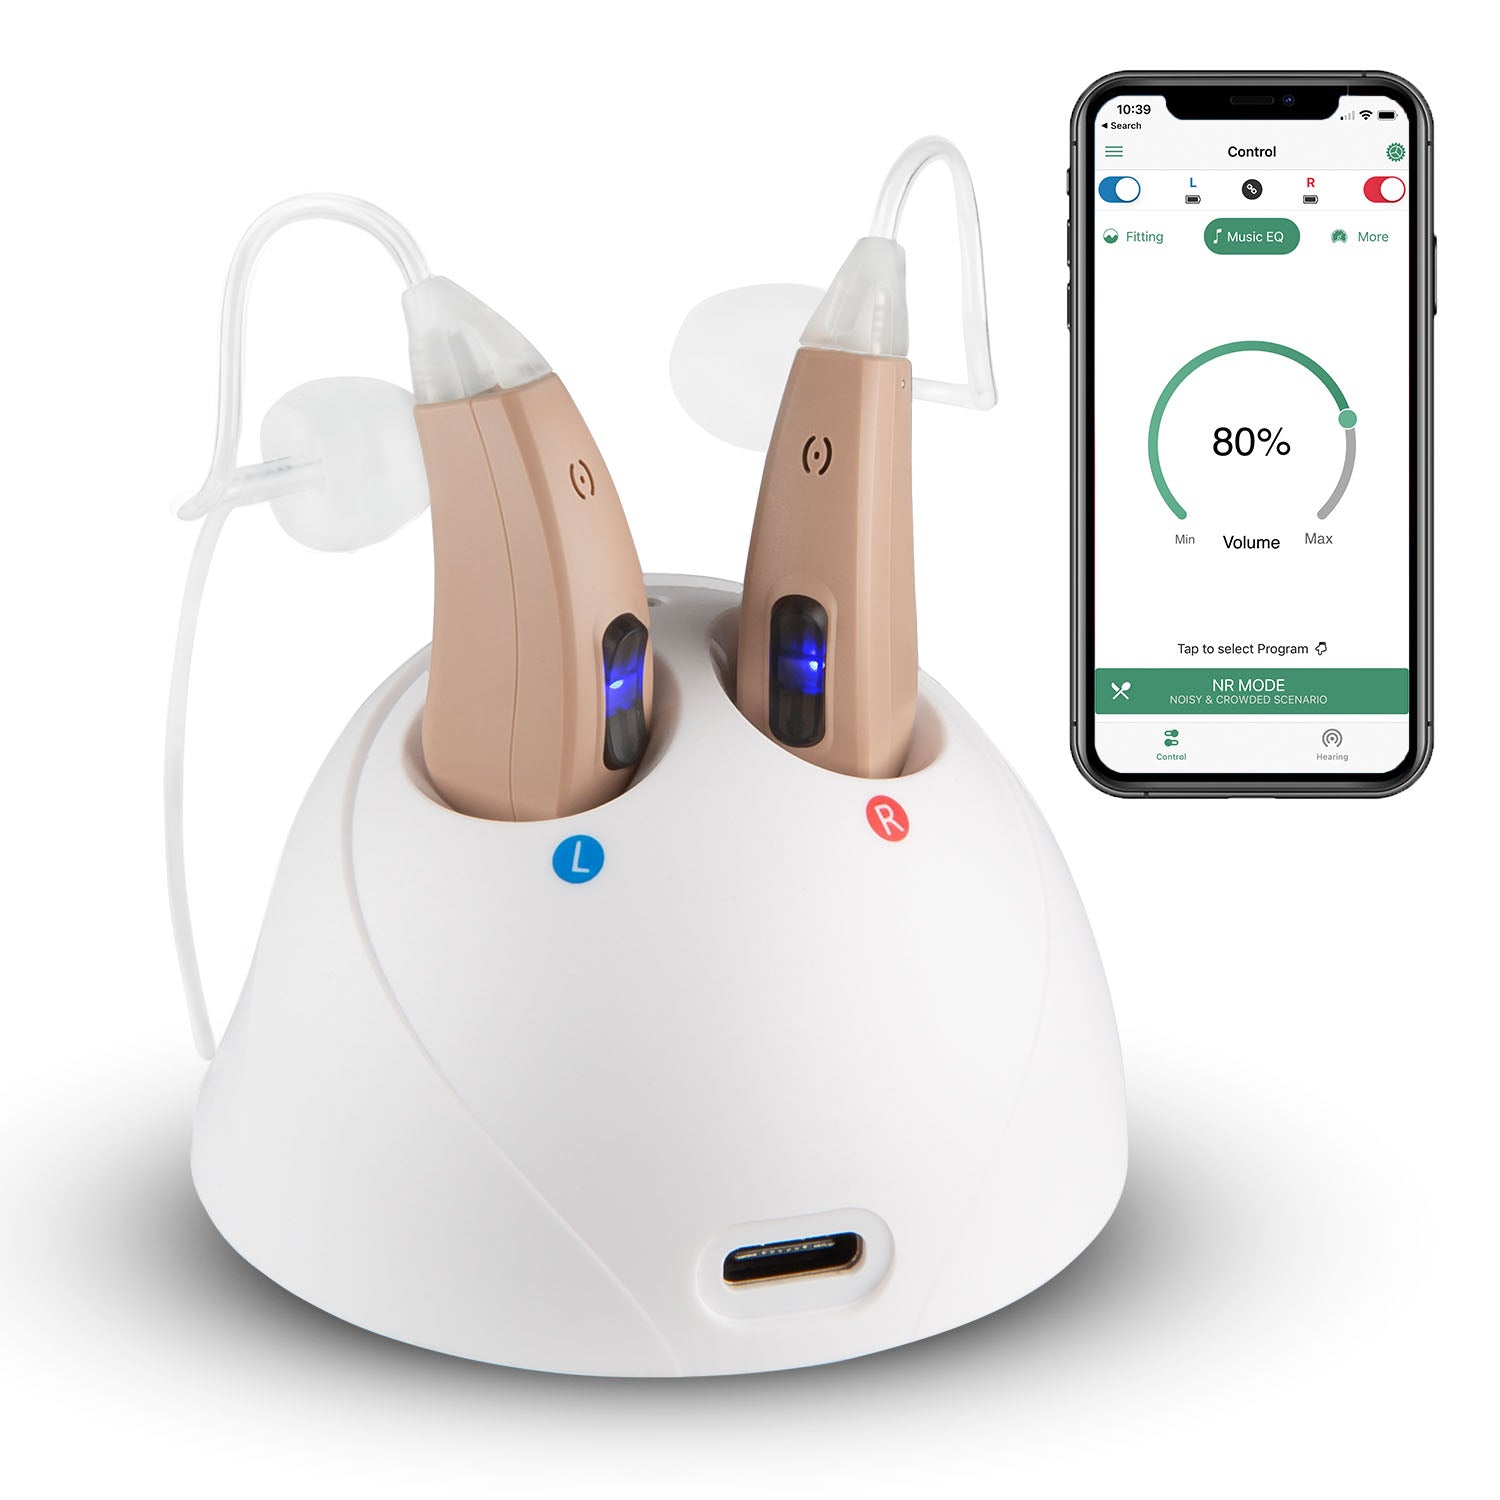 MX-Smart Self-Fitting Hearing Aids - Customizable with Bluetooth Phone APP, Pair